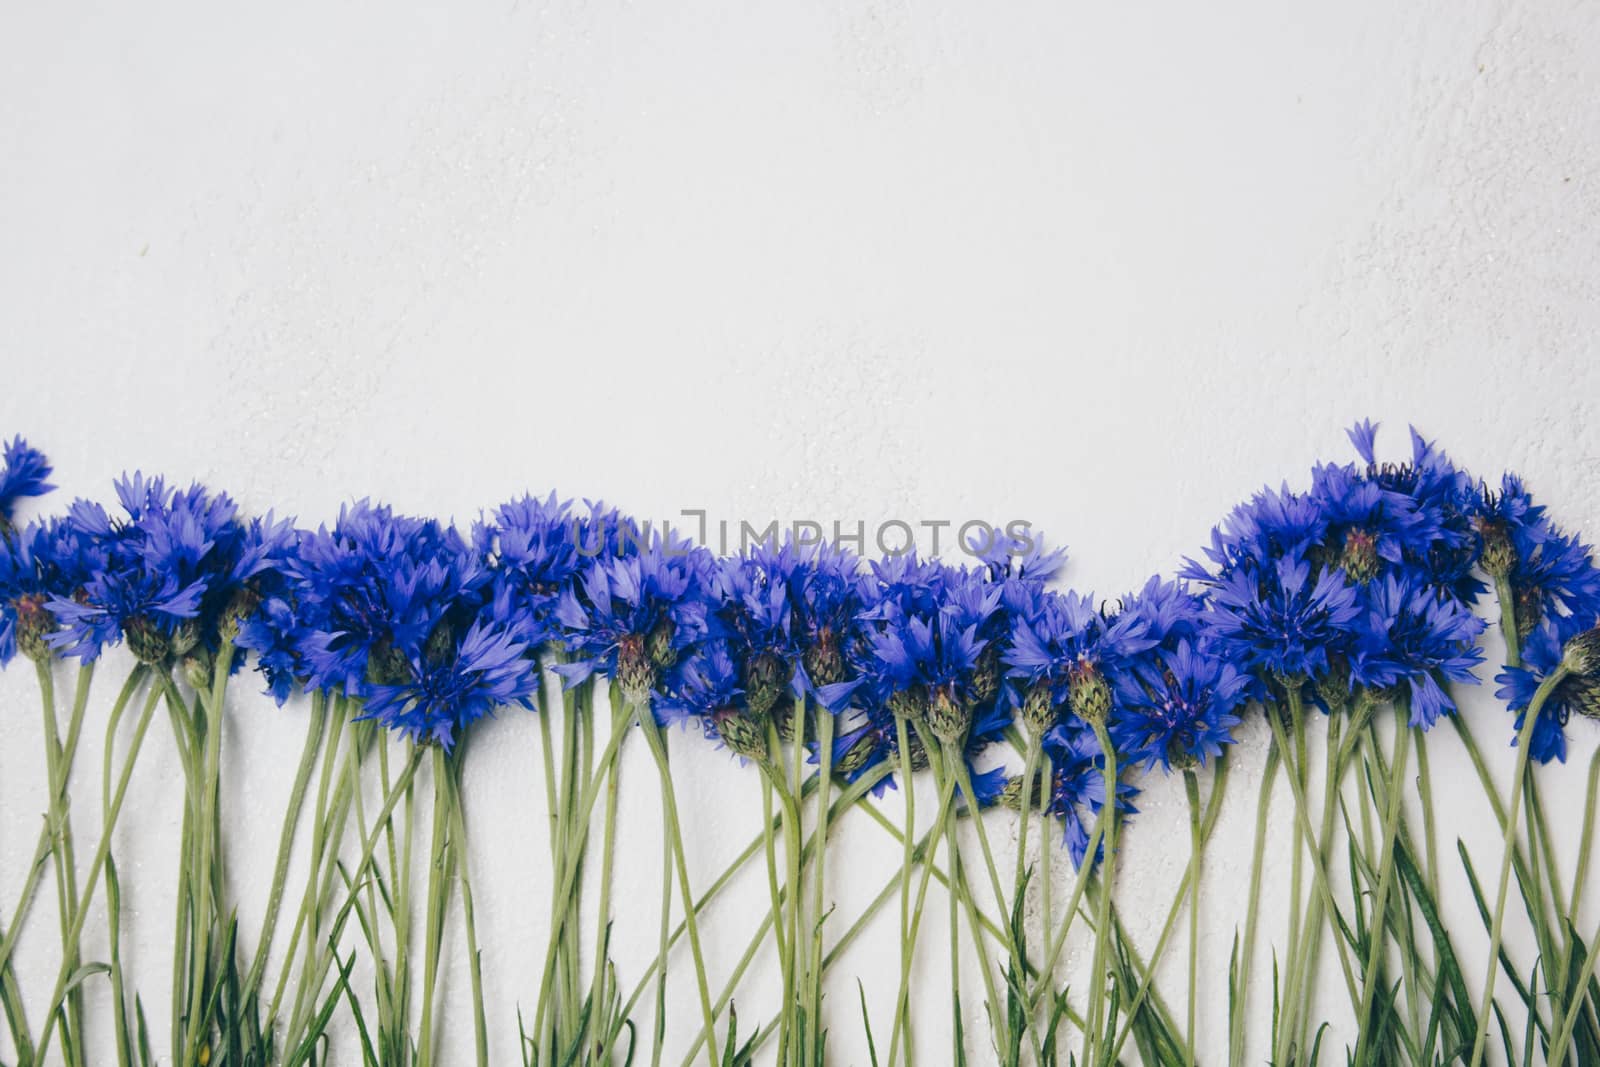 blue cornflowers bouquet, summer flowers on white background, floral background, beautiful small cornflowers close up by yulaphotographer